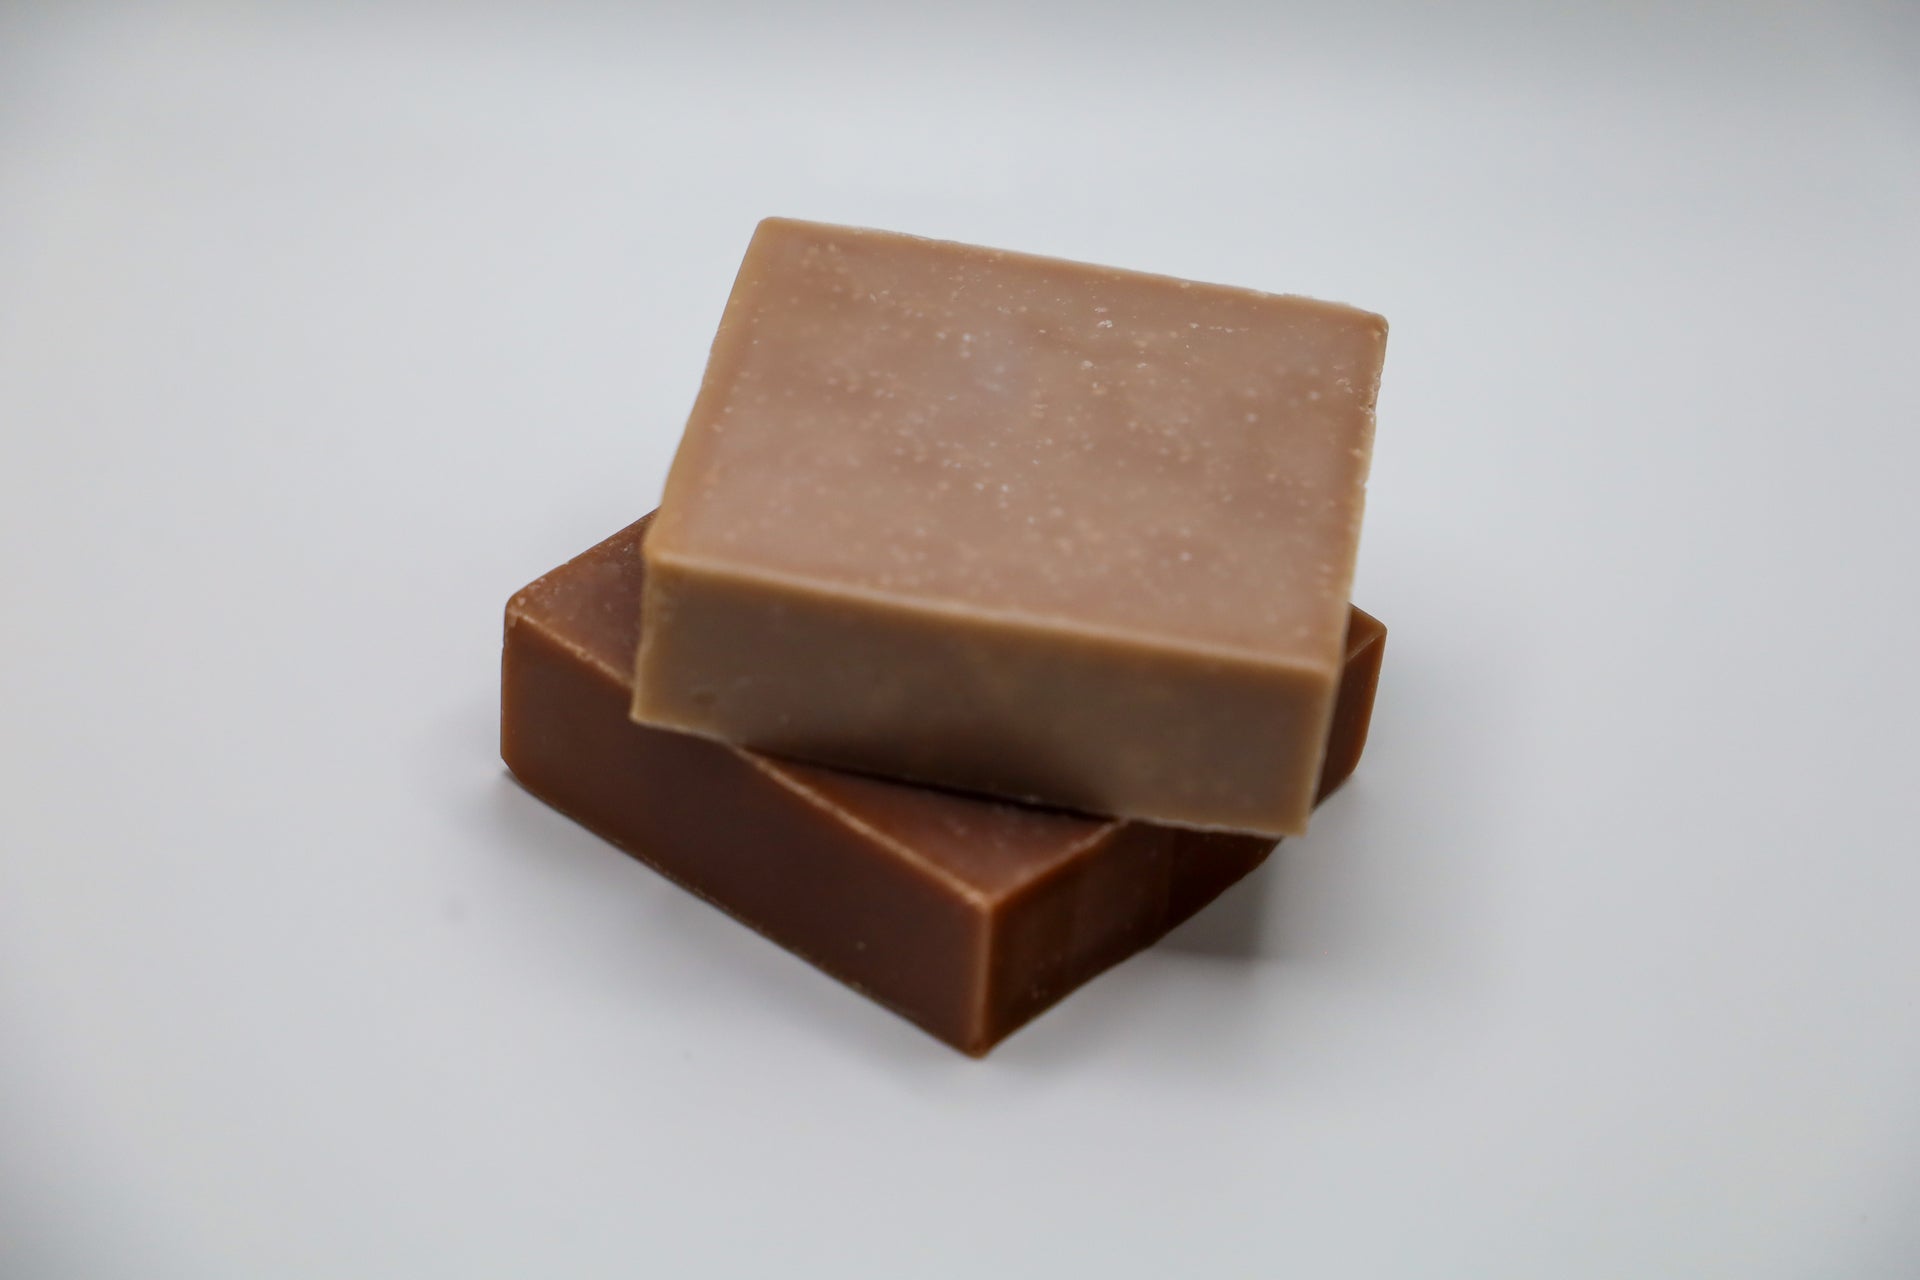 Soap Bar in rich brown tones, tobacco and amber scent which is somewhat masculine